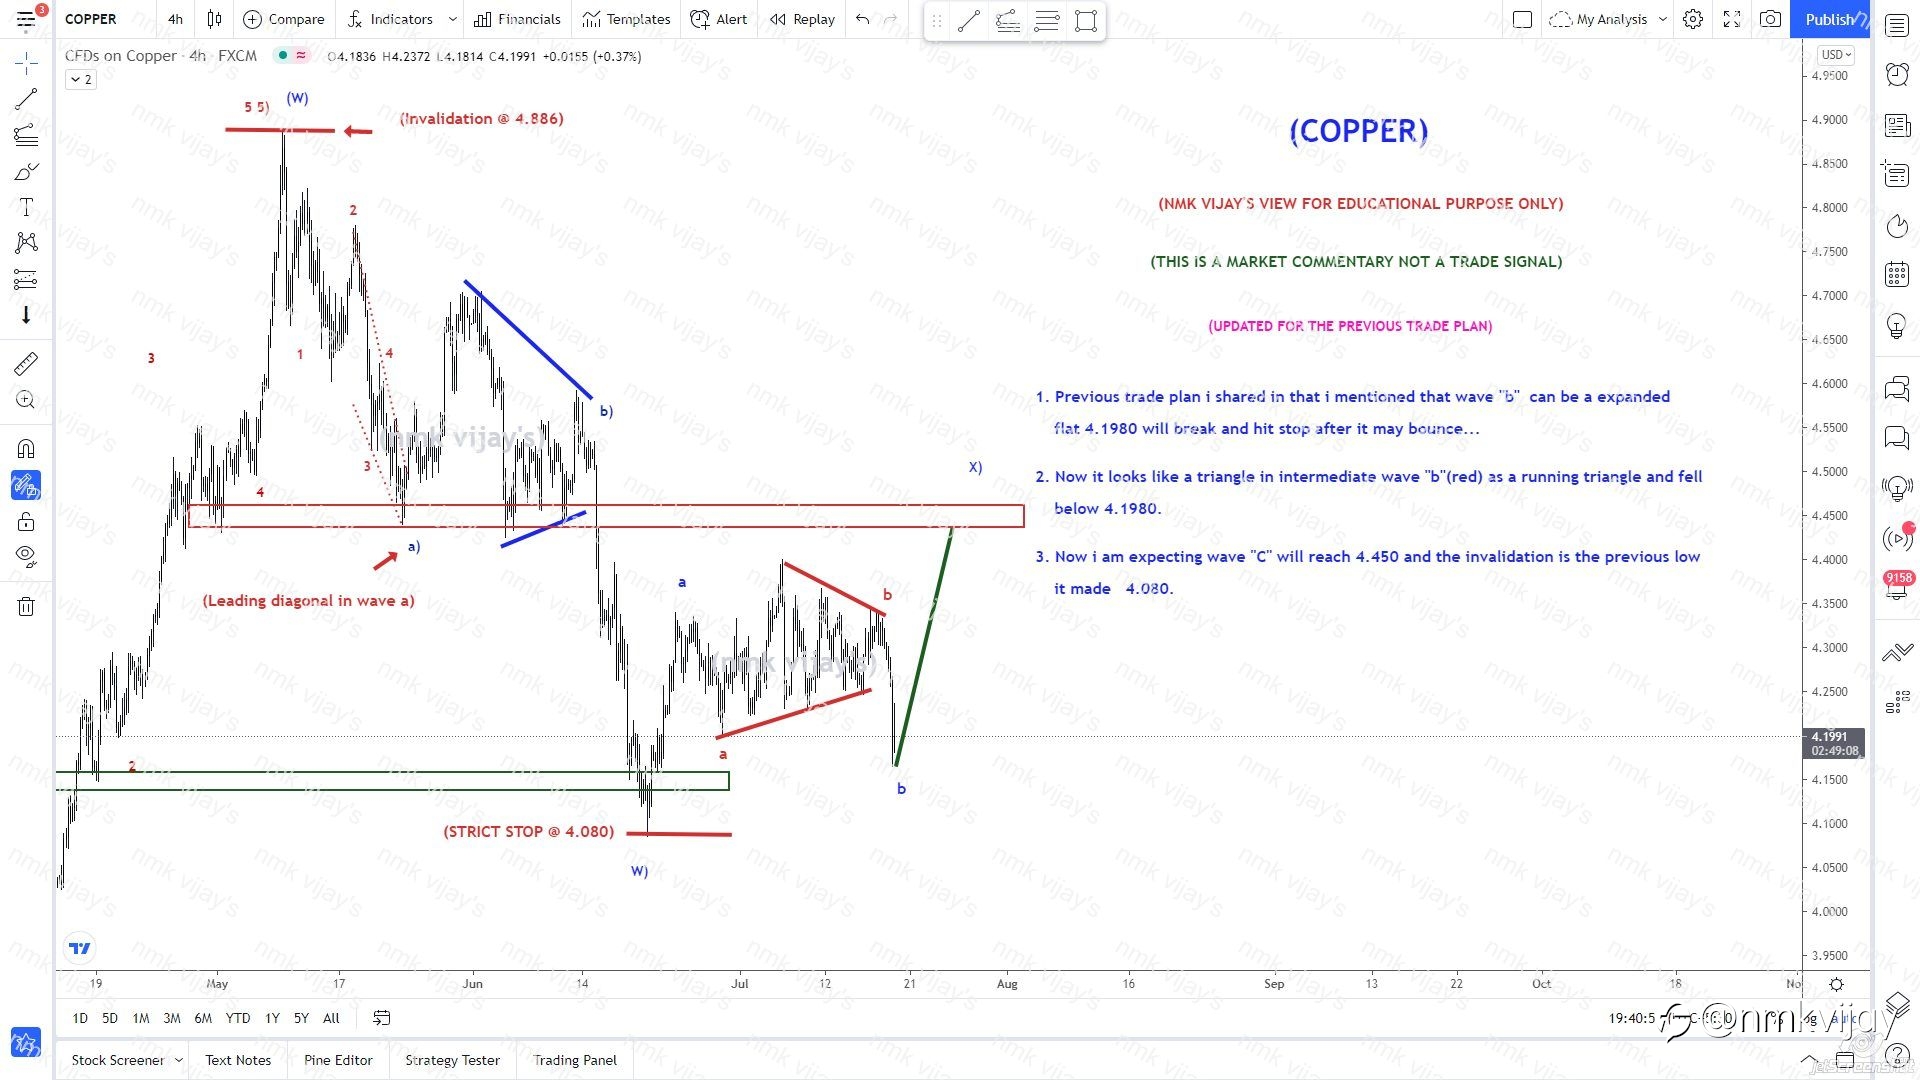 COPPER-Wave b(red) is a triangle now C to 1.4450 for X)?